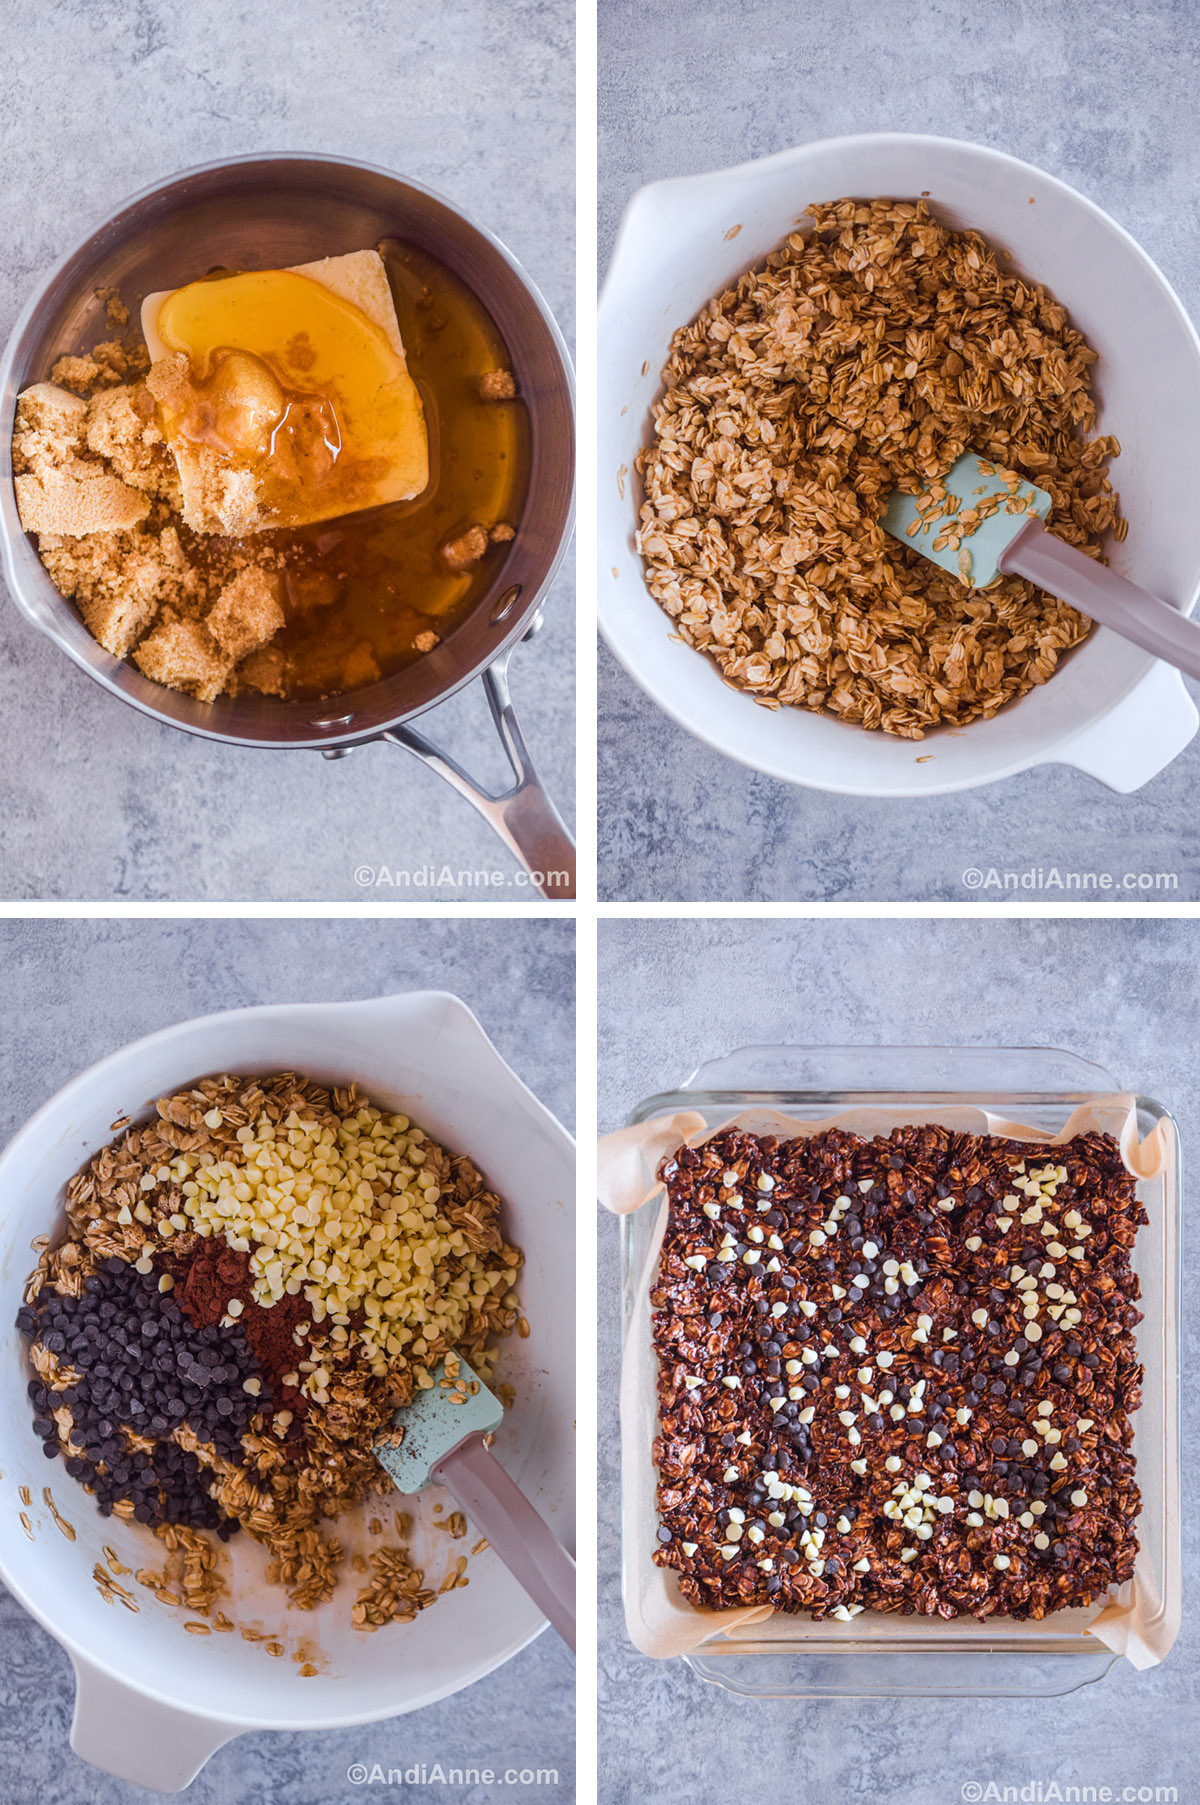 Four images showing different steps to make the recipe. First is a pot with a chunk of butter, brown sugar and honey dumped in. Second is rolled oats with ingredients mixed in a white bowl and spatula. Third is white and chocolate chips and cocoa powder dumped on top of the oats in a bowl. Fourth is a square glass dish with chocolate granola bar ingredients pressed in.